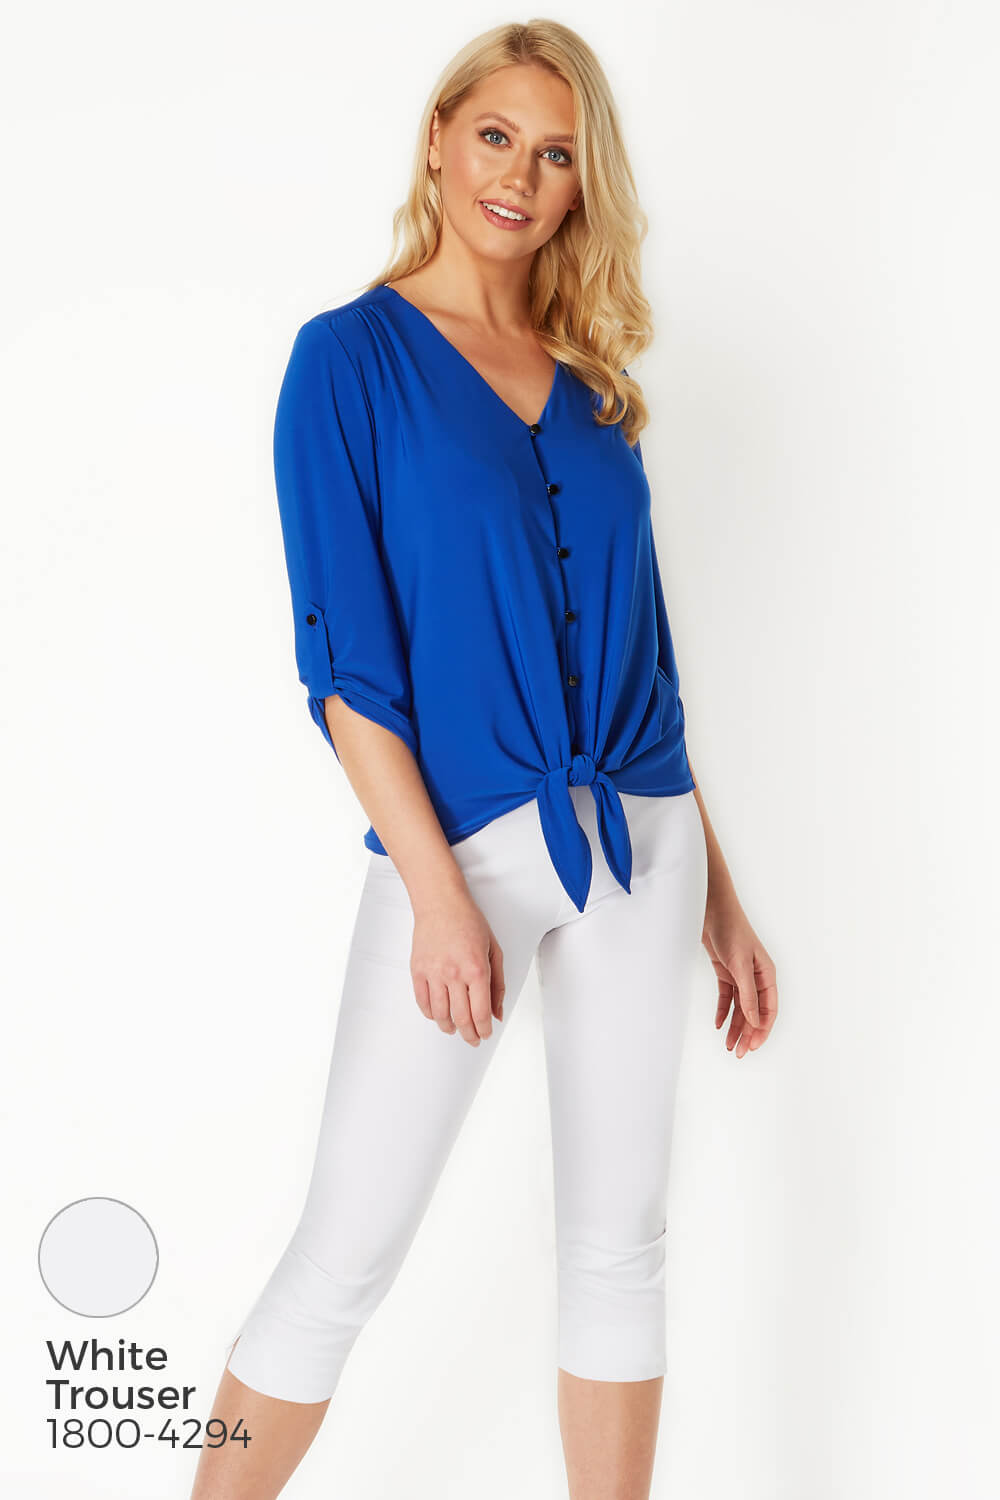 Royal Blue Tie Front Button Up Blouse, Image 5 of 8